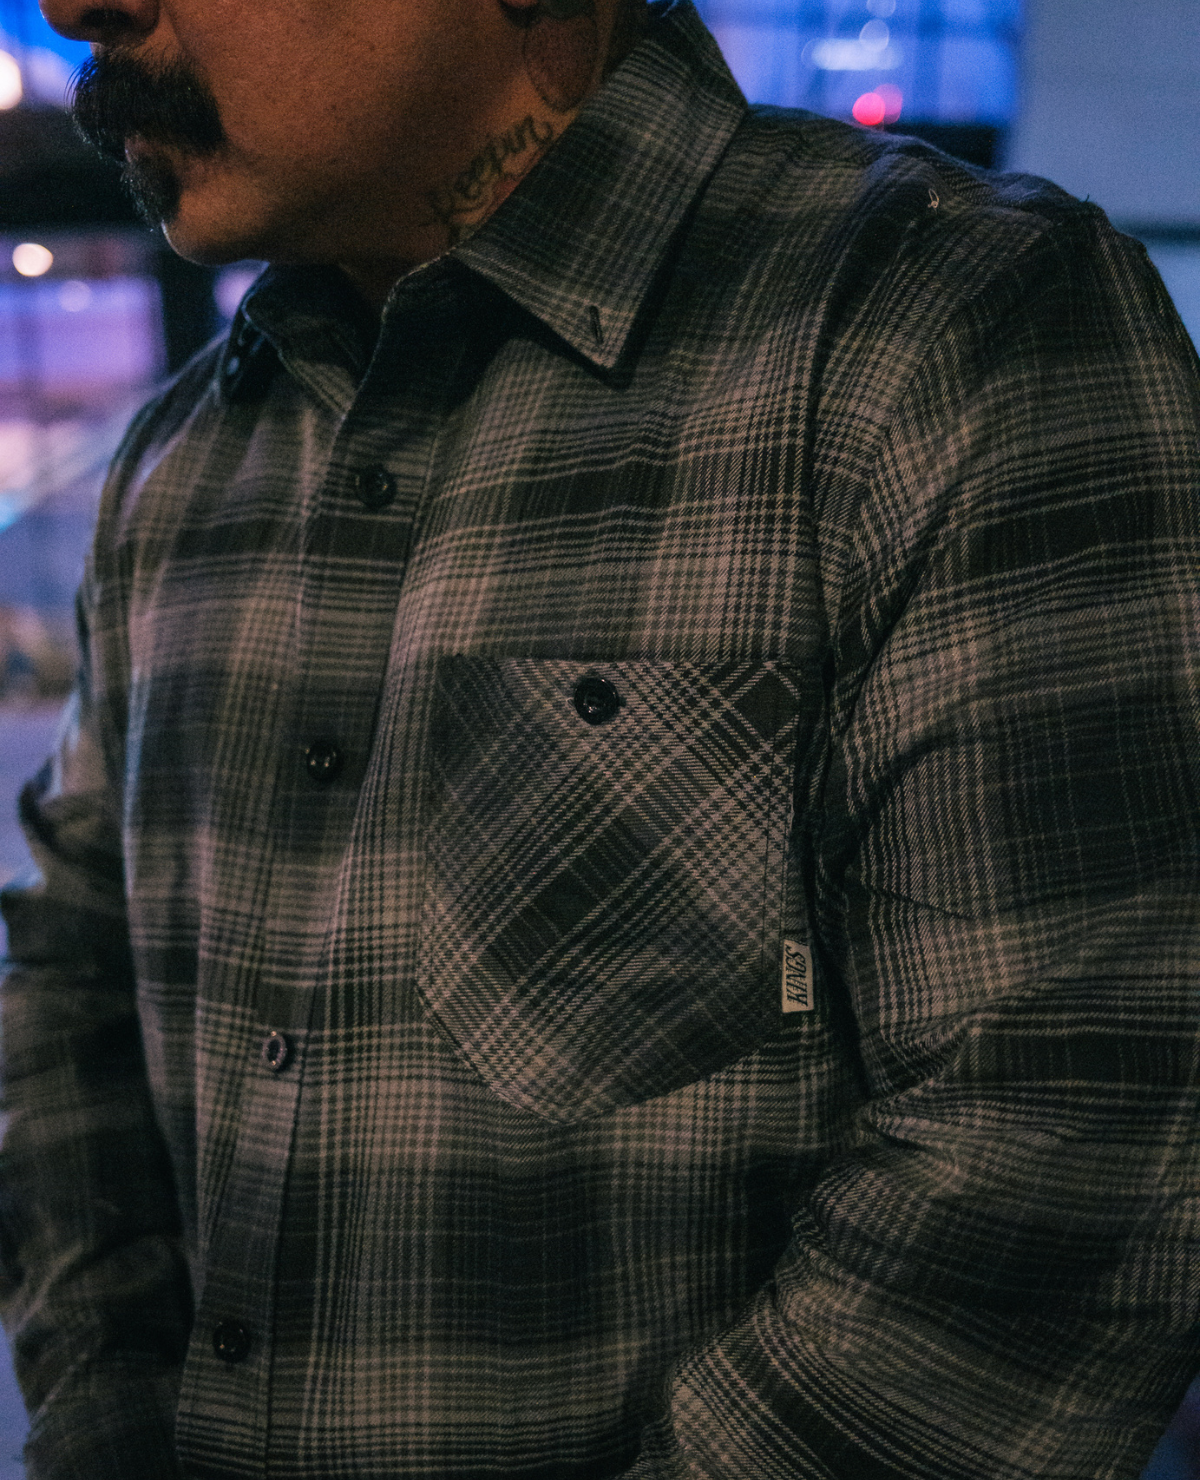 Orquest aedelweiss Hockey Clothing apparel company - partnership with the Los Angeles Kings NHL Team - Shop this limited edition flannel